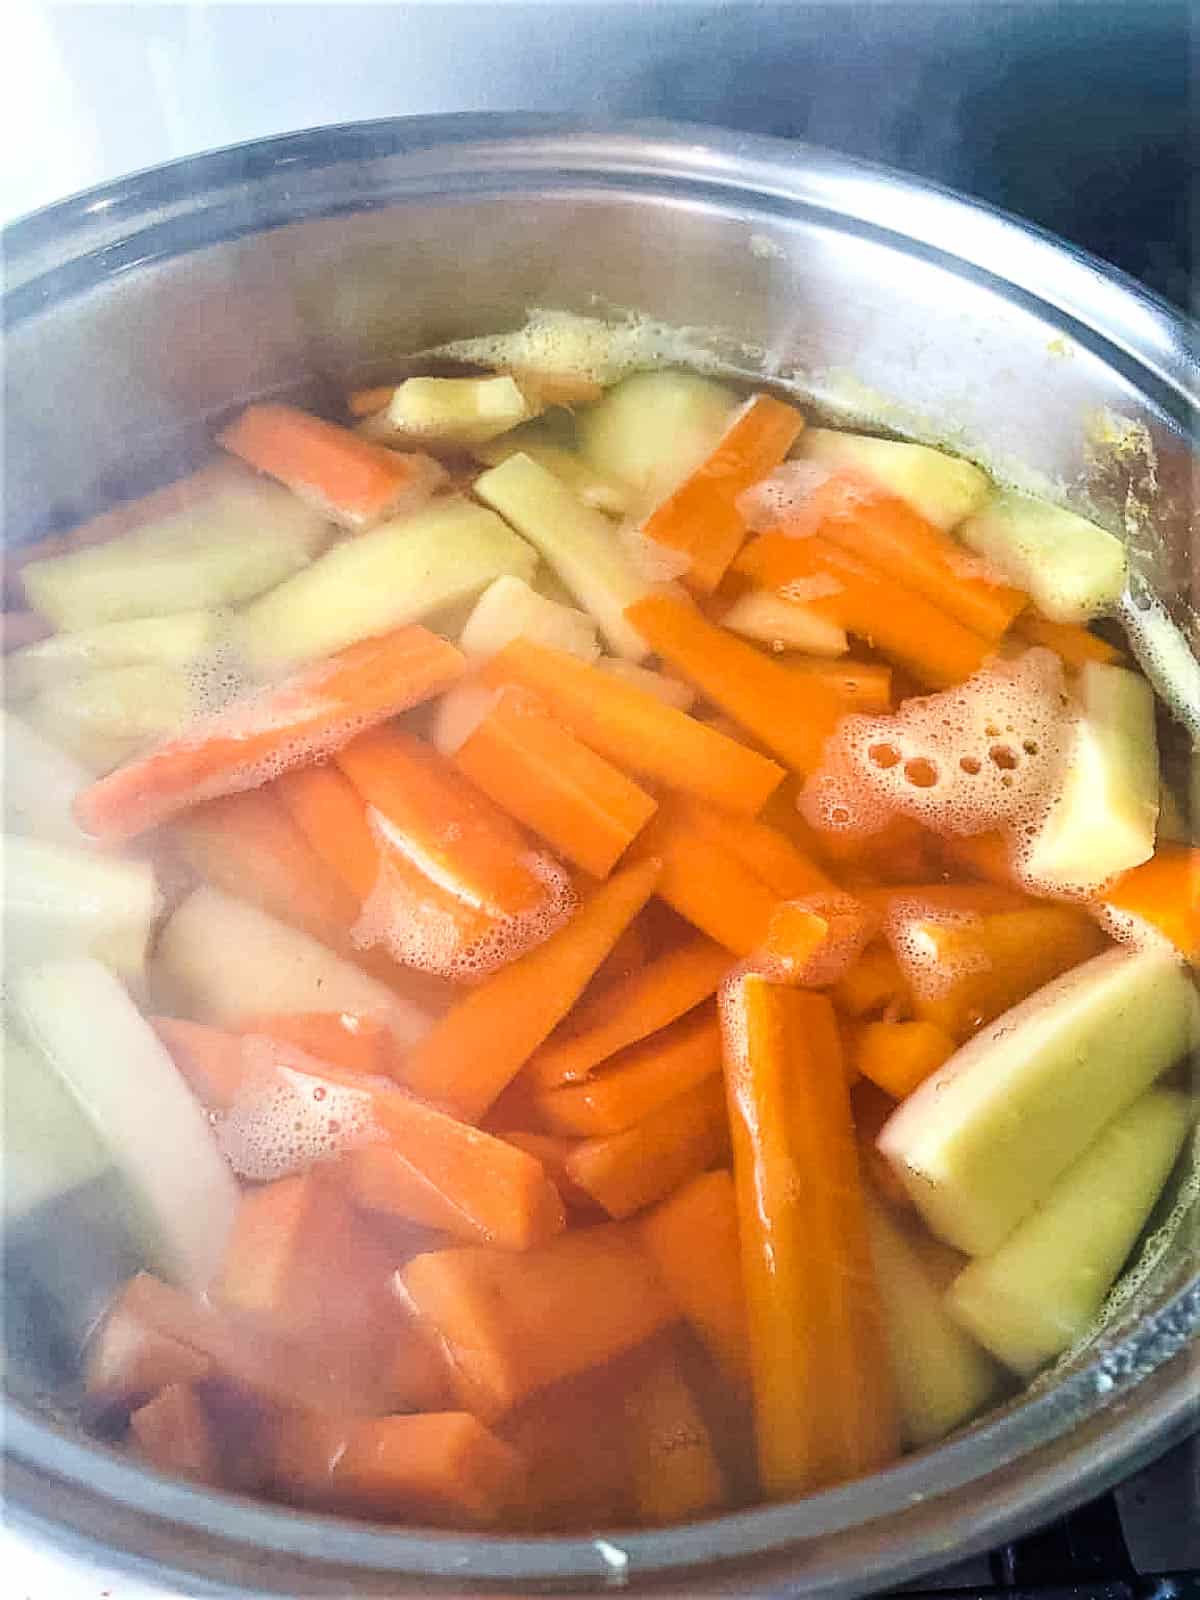 sliced carrots and parnips in pan.